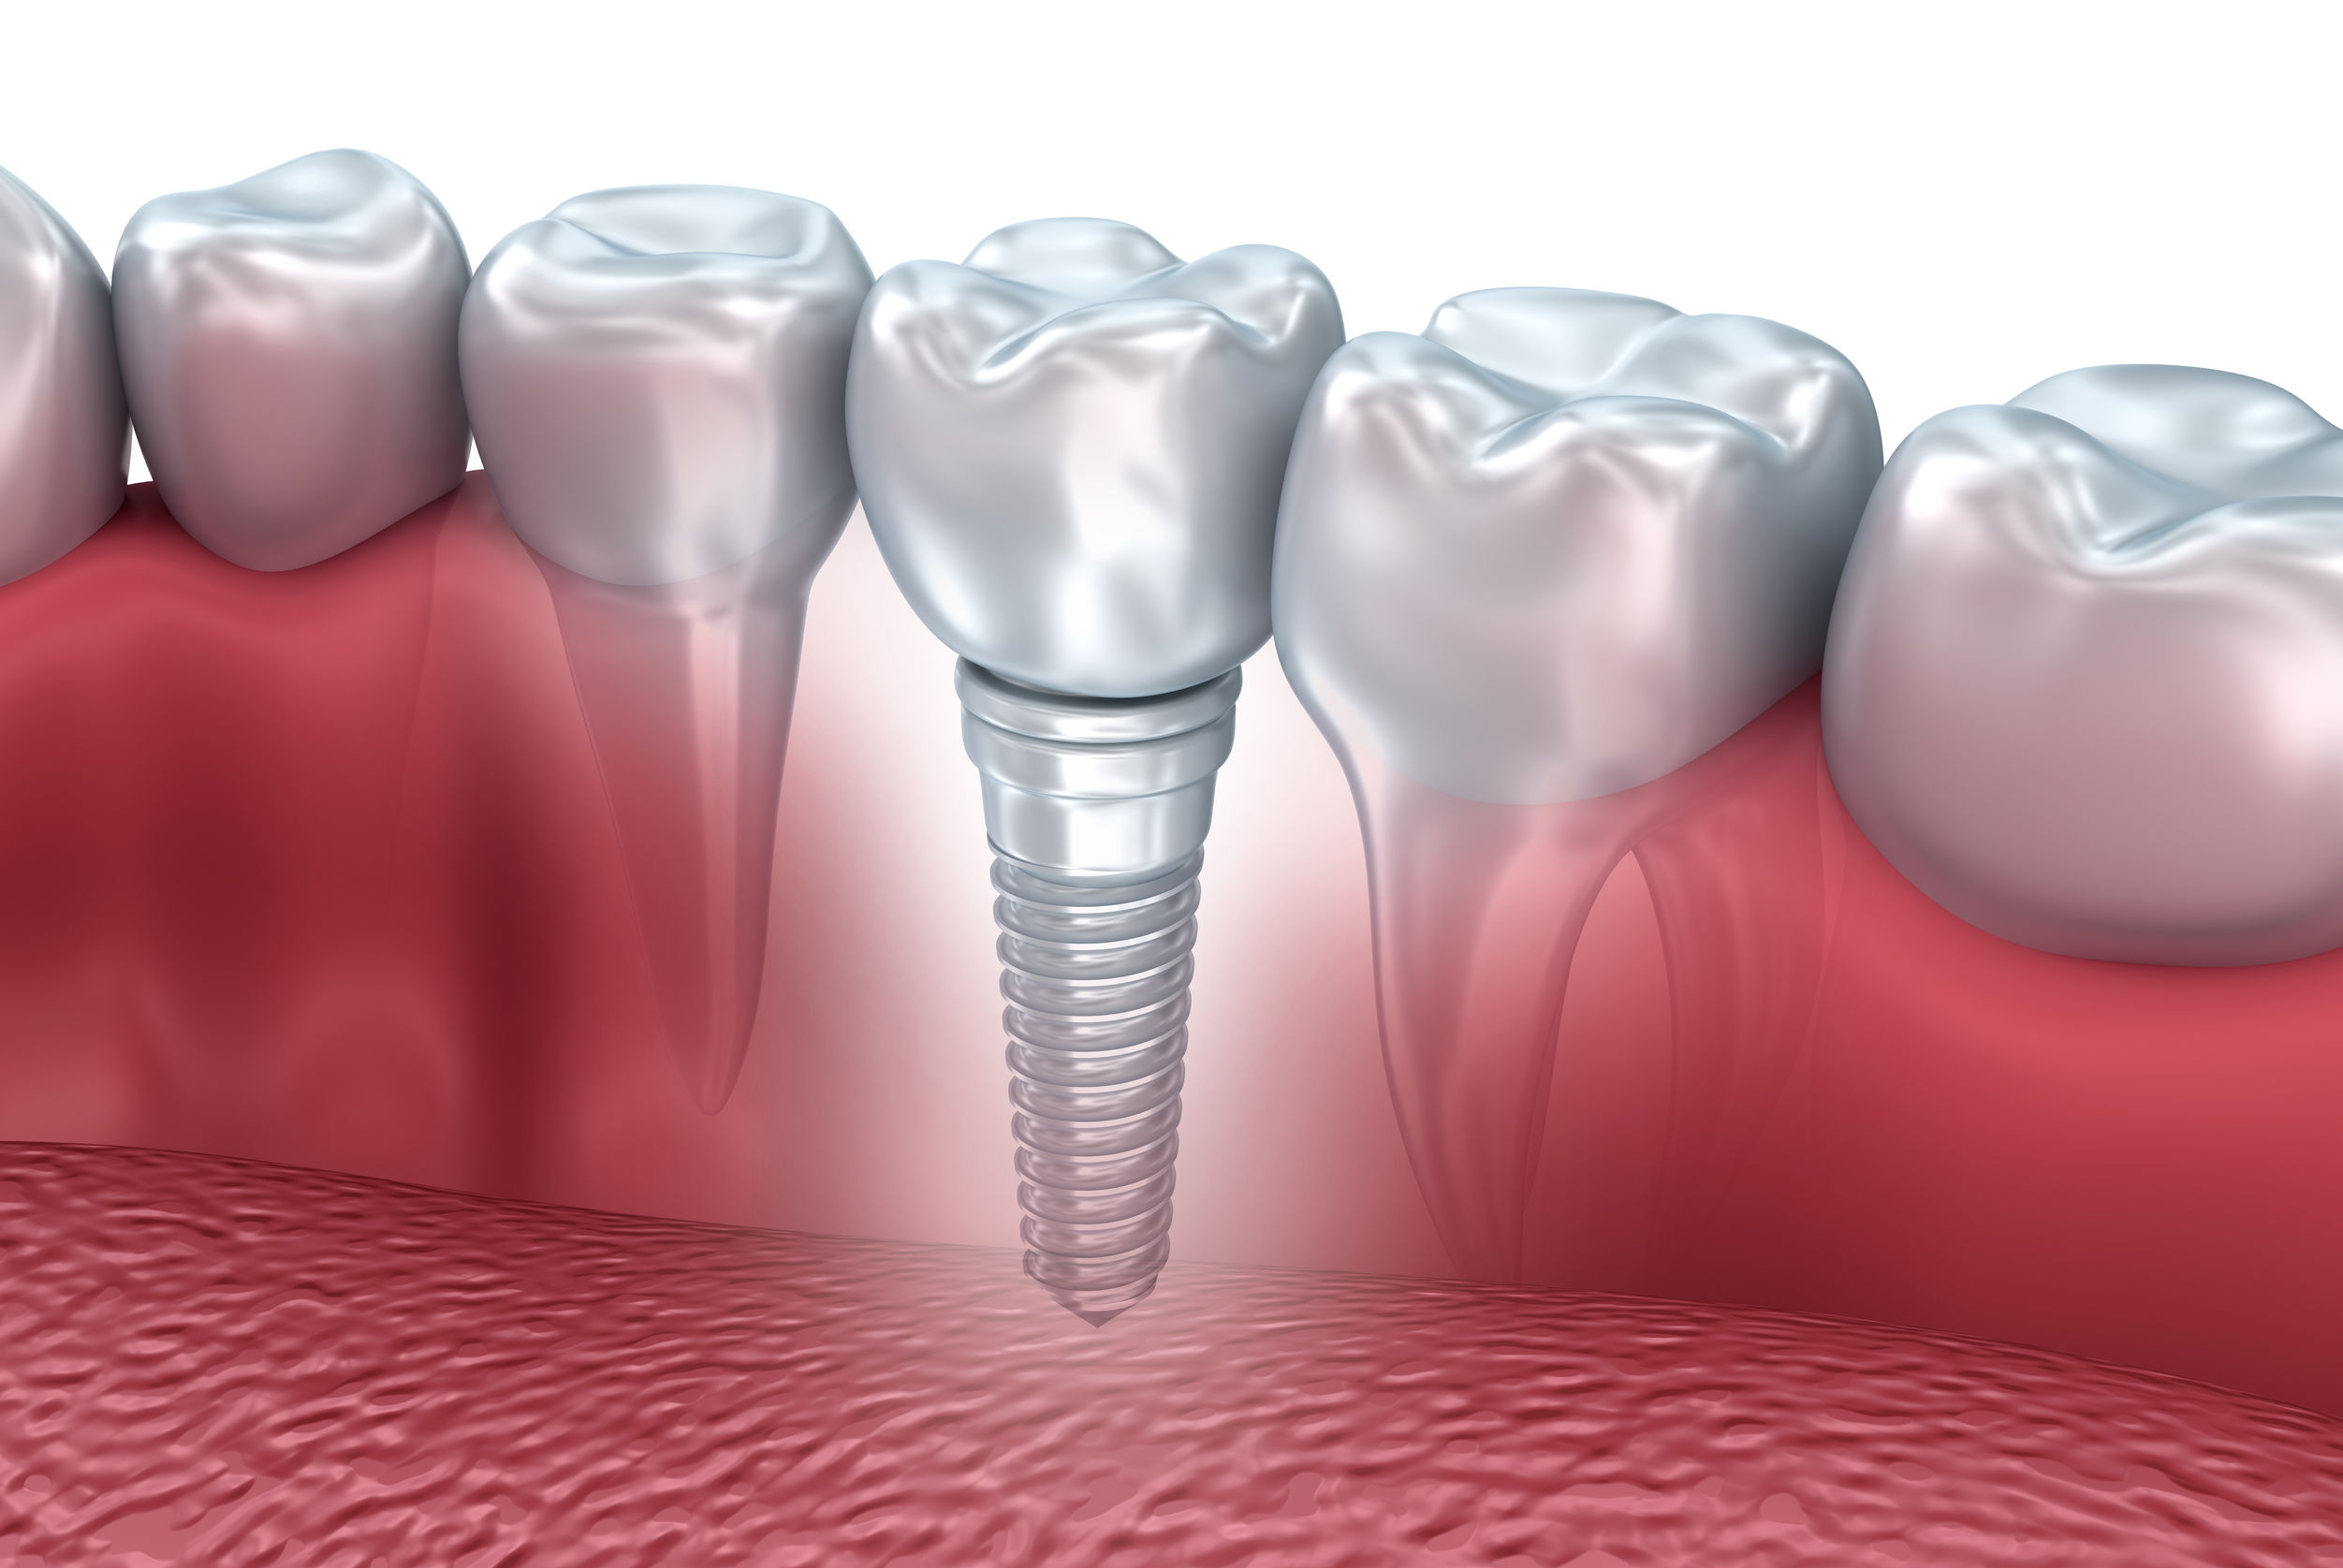 50149095 - tooth human implant, 3d illustration